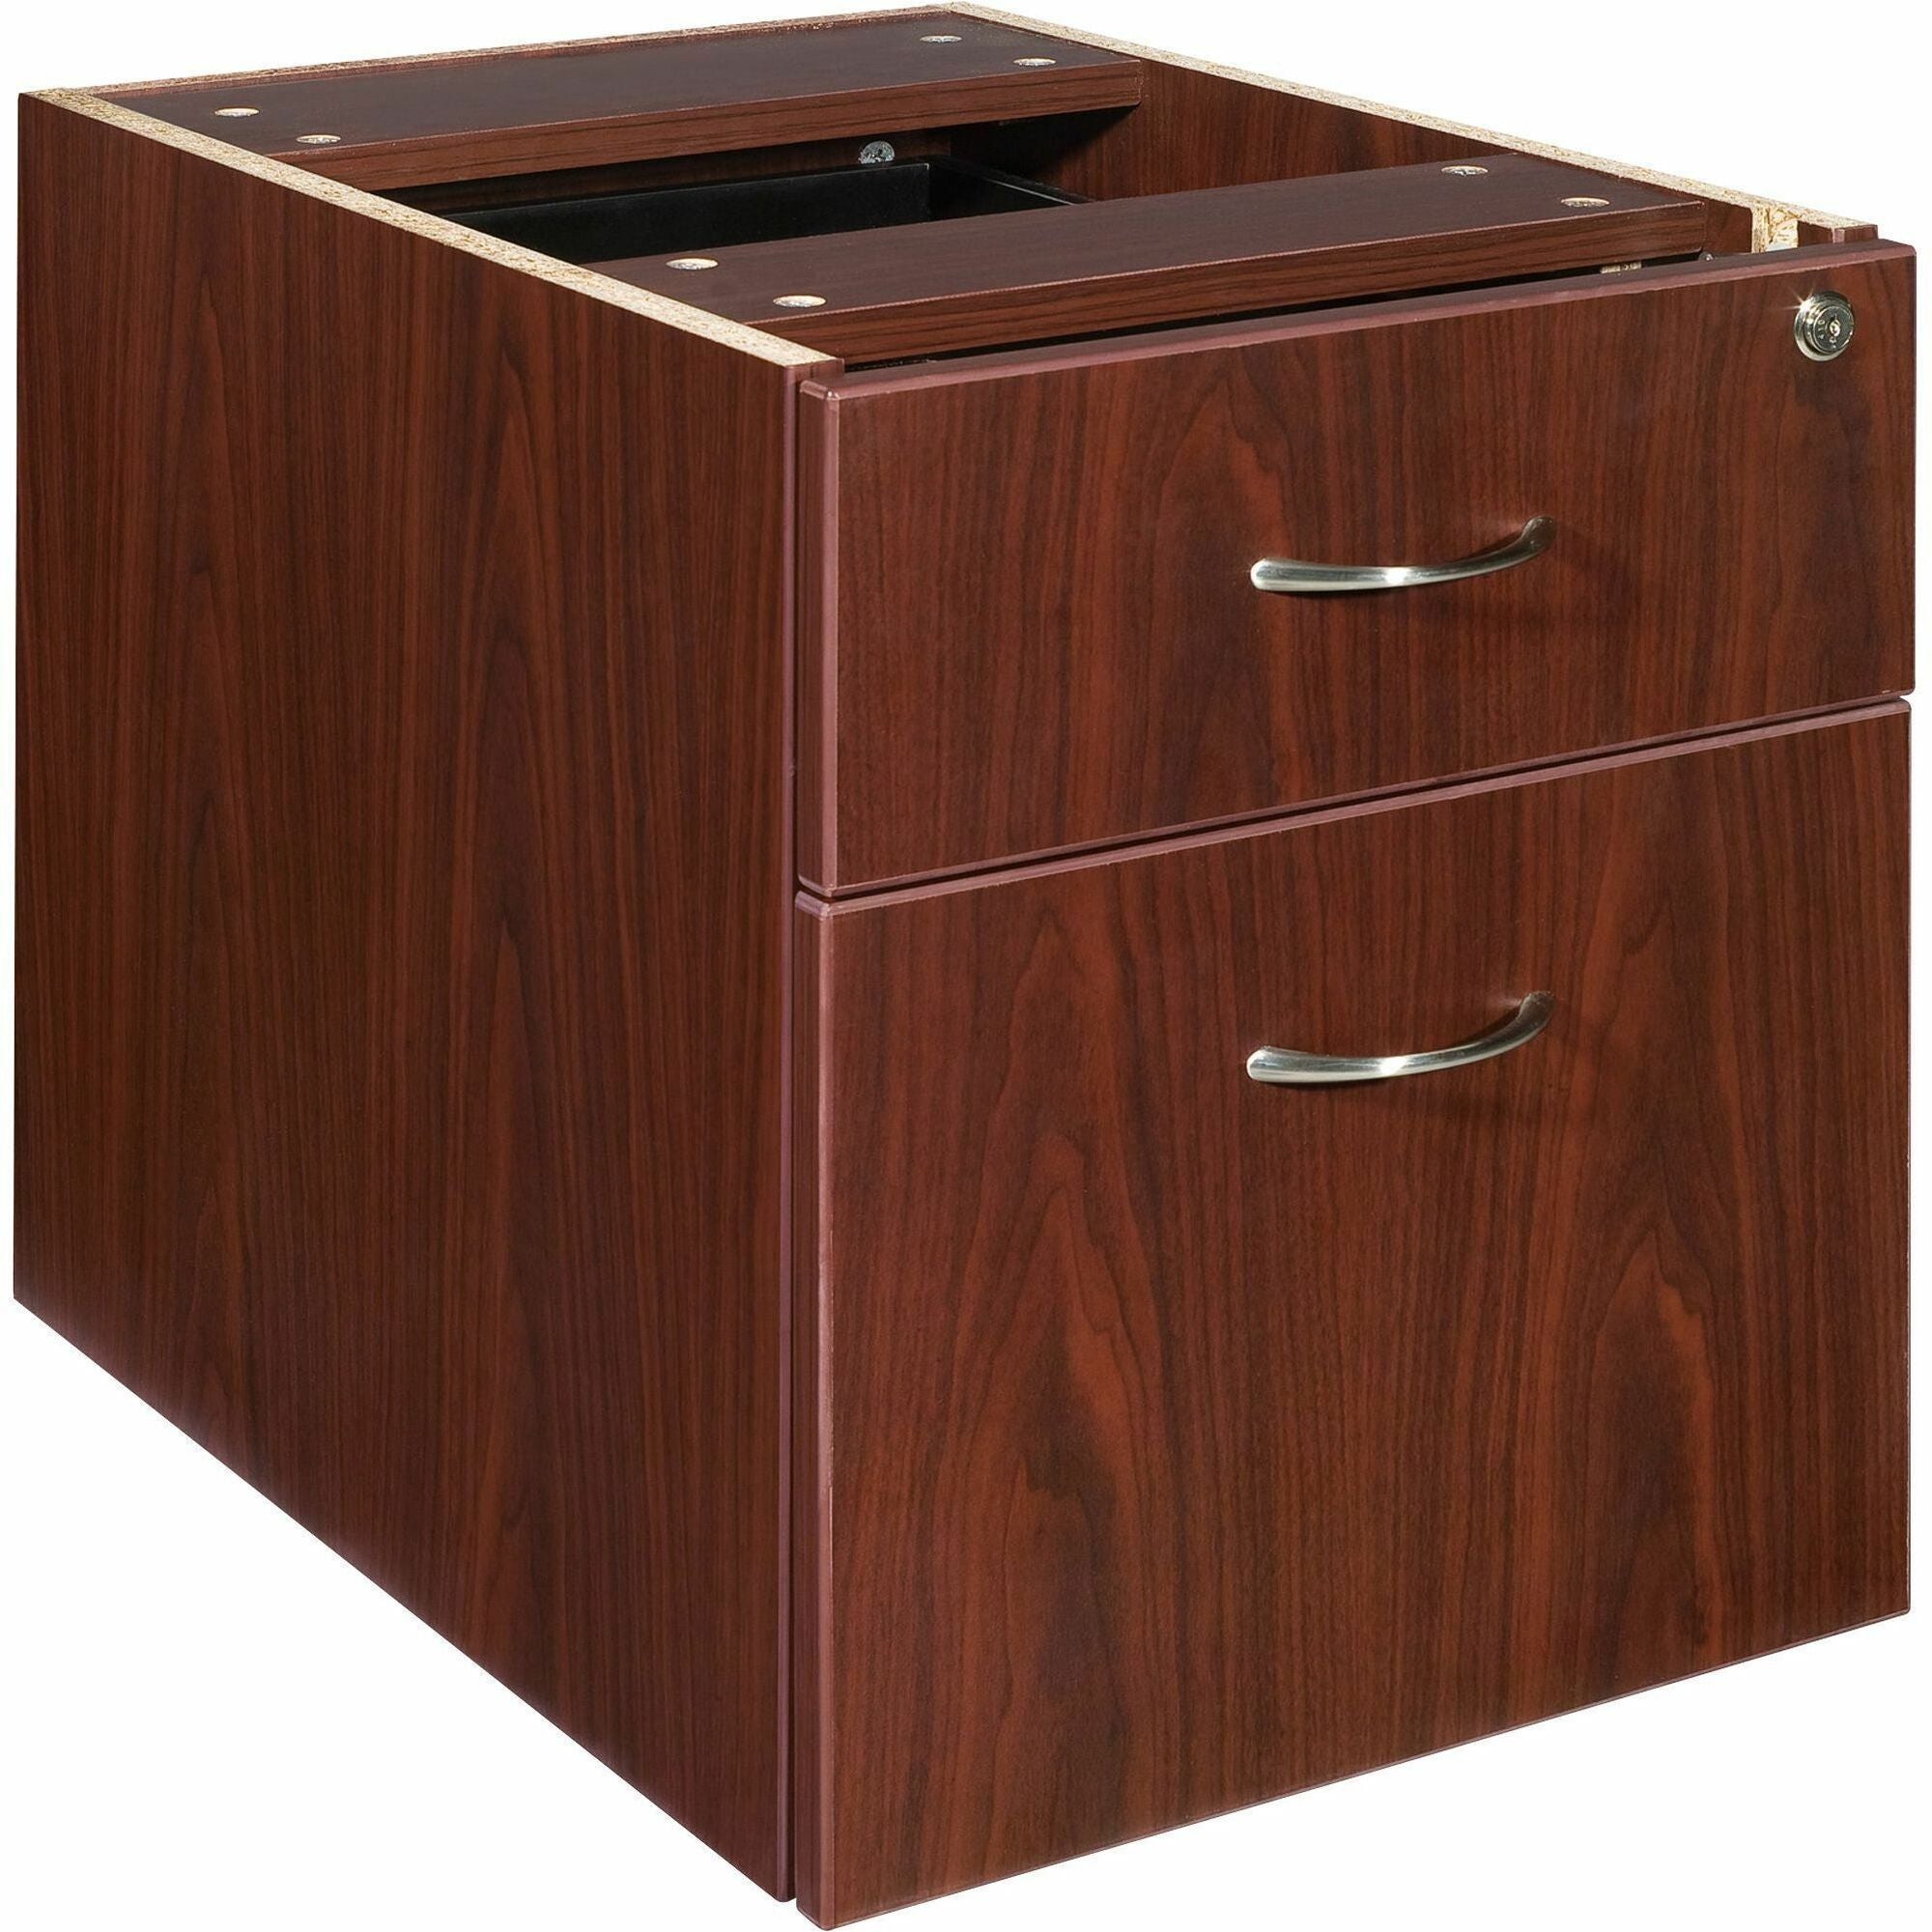 Lorell Essentials Series Box/File Hanging File Cabinet - 15.5" x 21.9" x 18.9" - 2 x Box, File Drawer(s) - Double Pedestal - Finish: Laminate, Mahogany - Ball-bearing Suspension, Lockable Drawer, Adjustable Feet - 